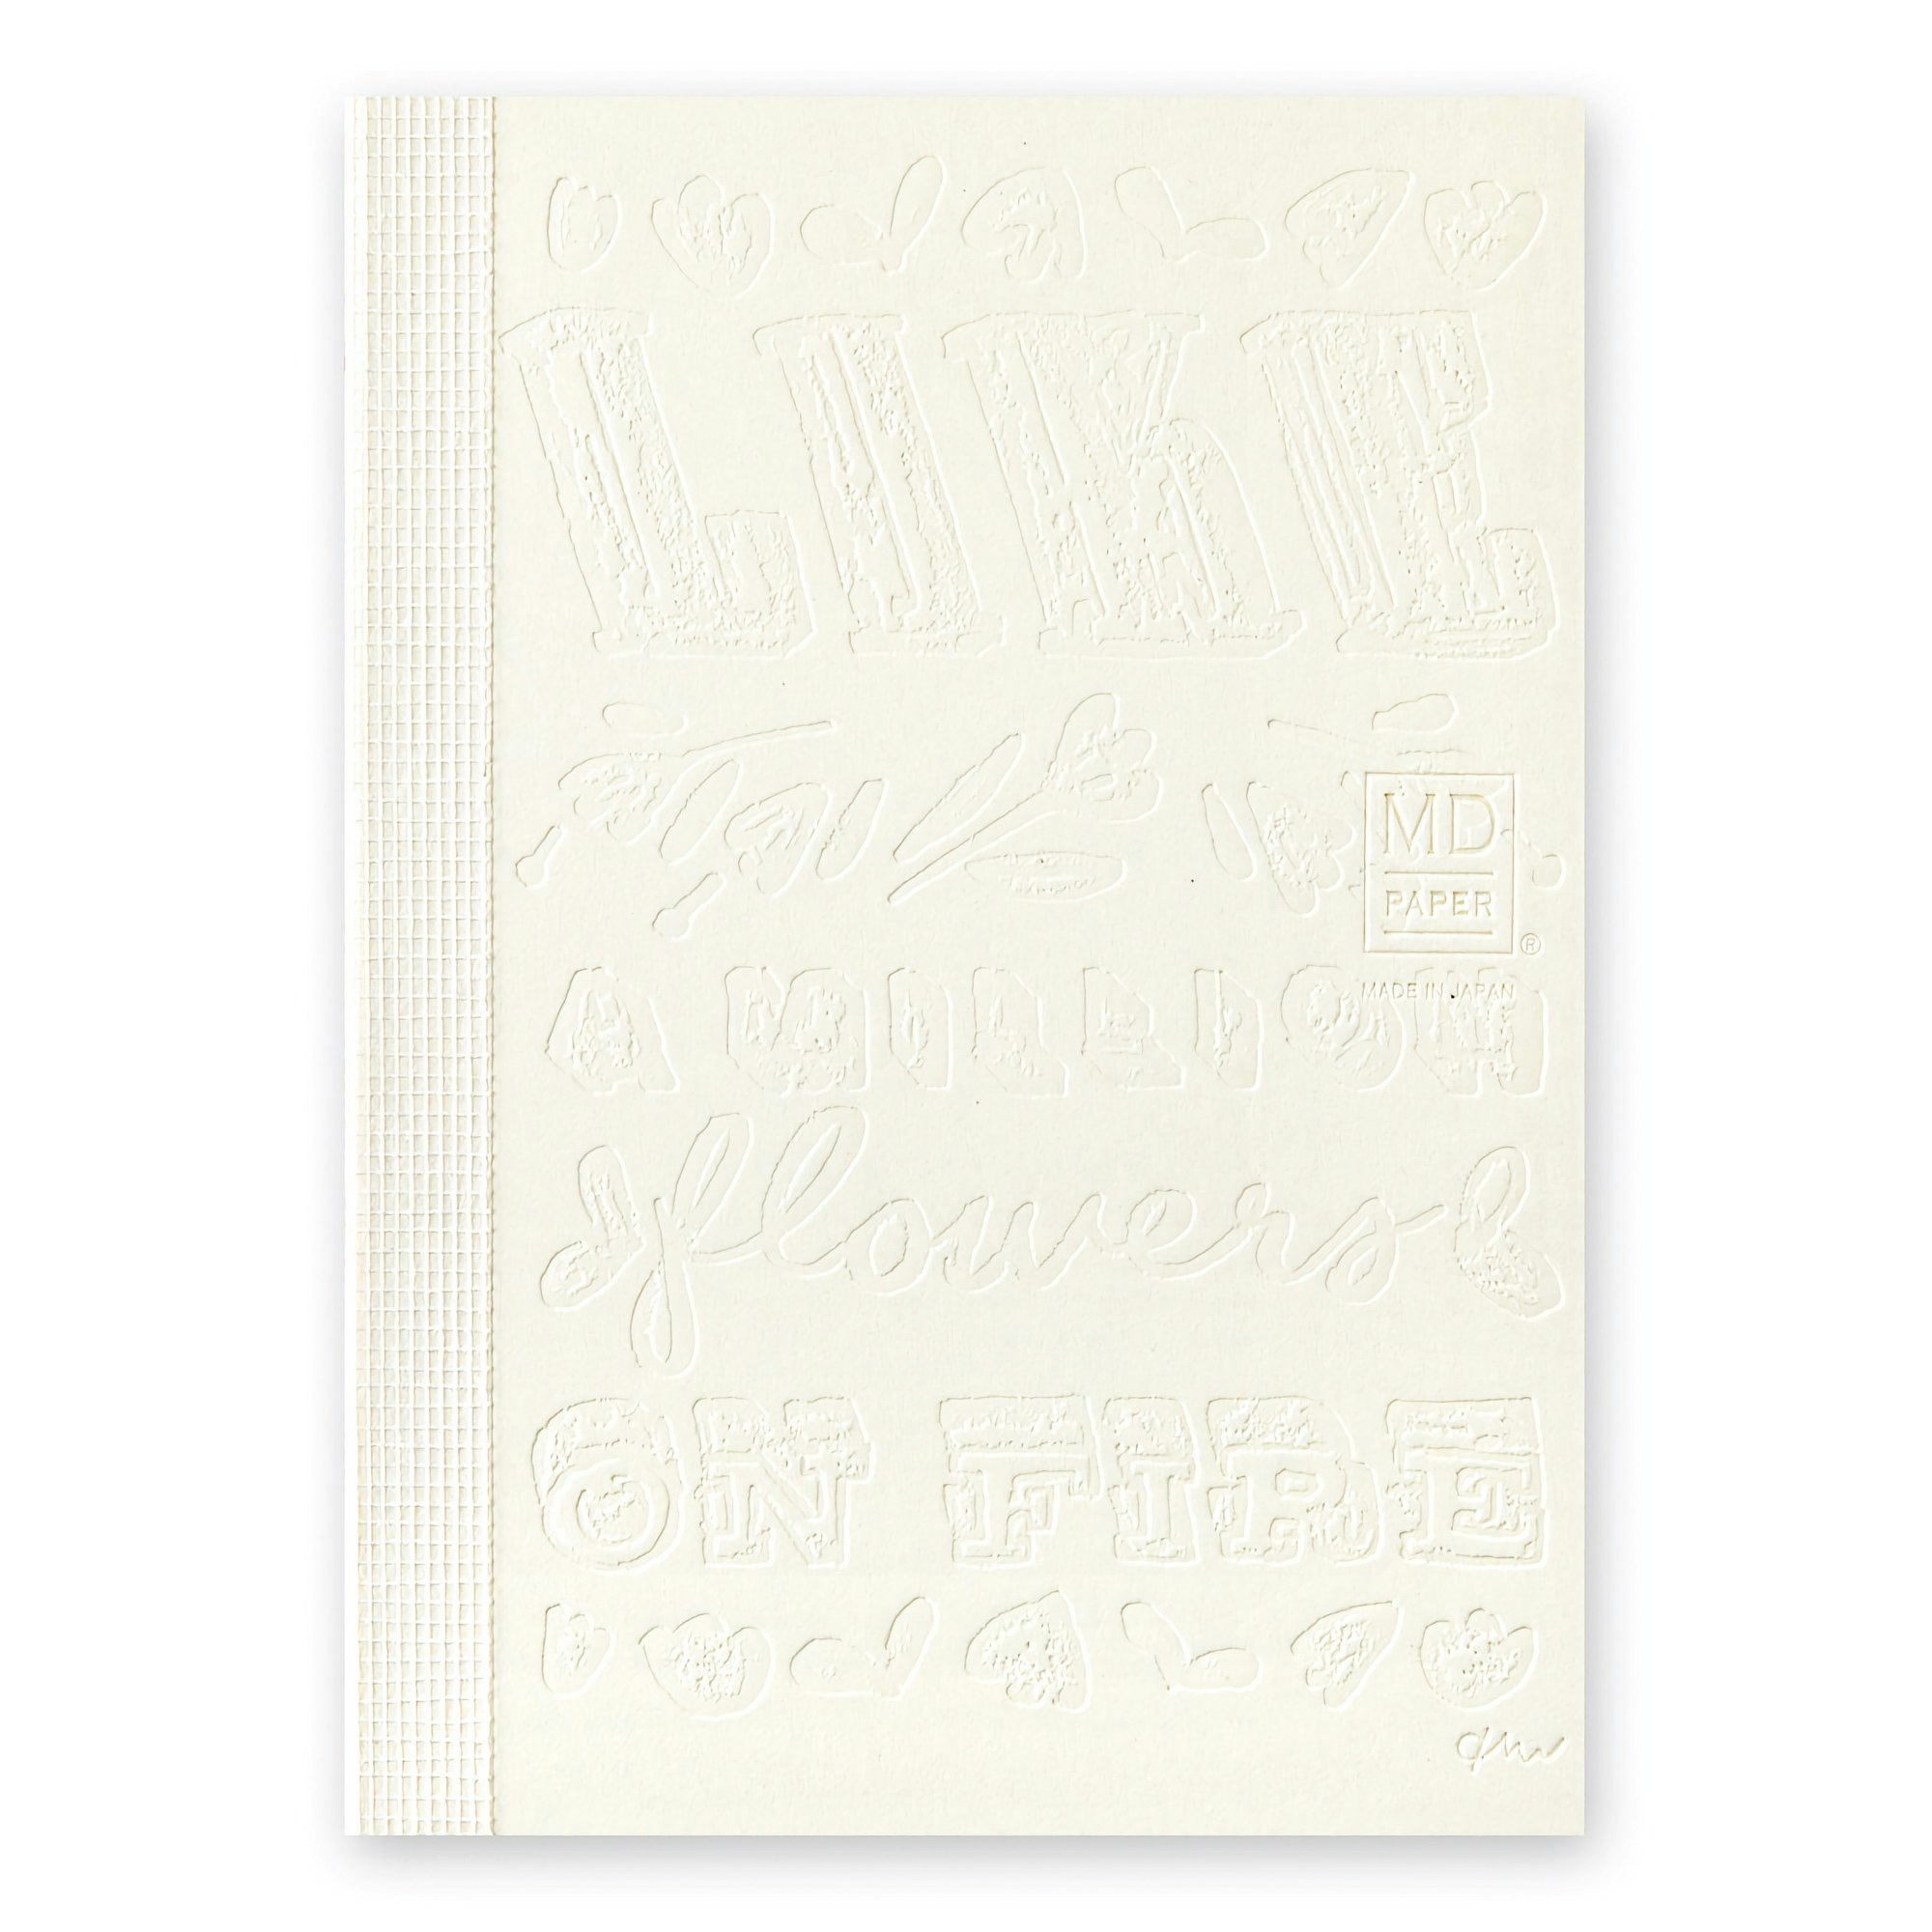 Midori MD Notebook [A6] Blank Artist Collaboration Holly Wales 15th Anniversary [Limited Edition]